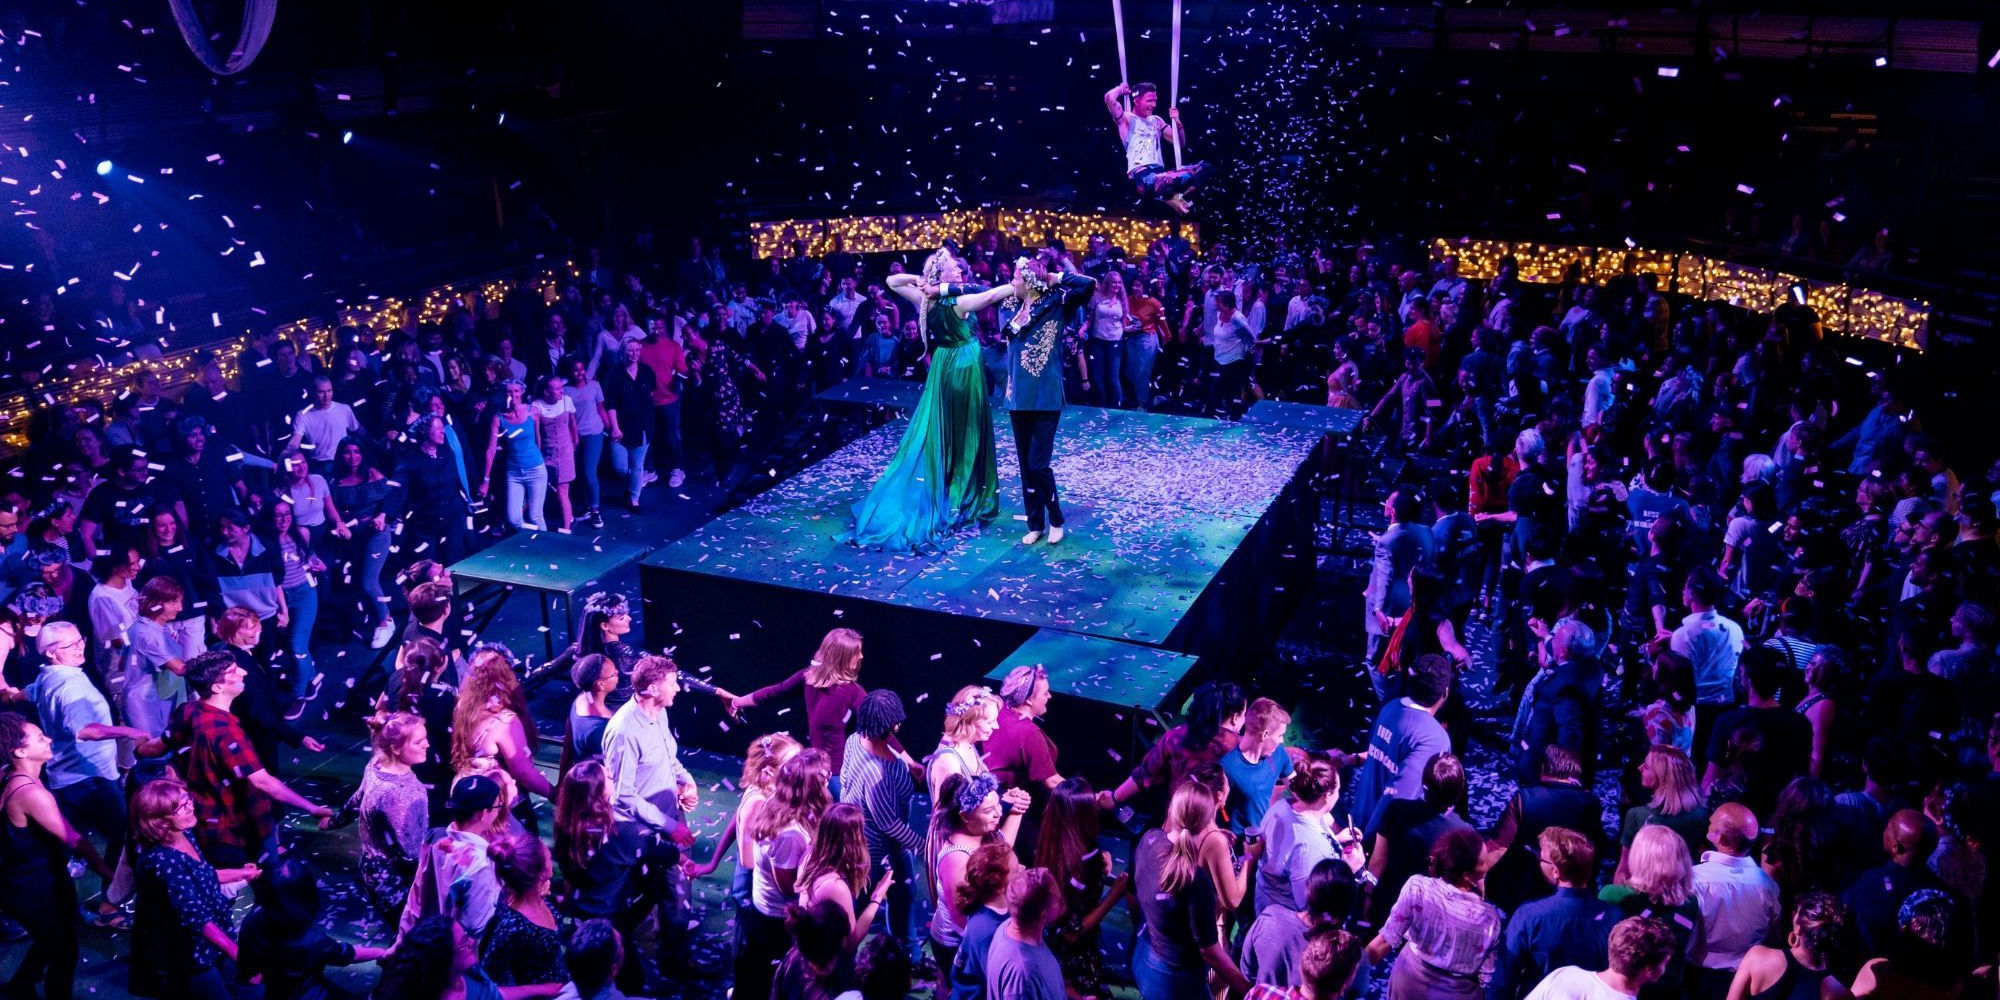 photo from the stage show of A Midsummer Night's Dream